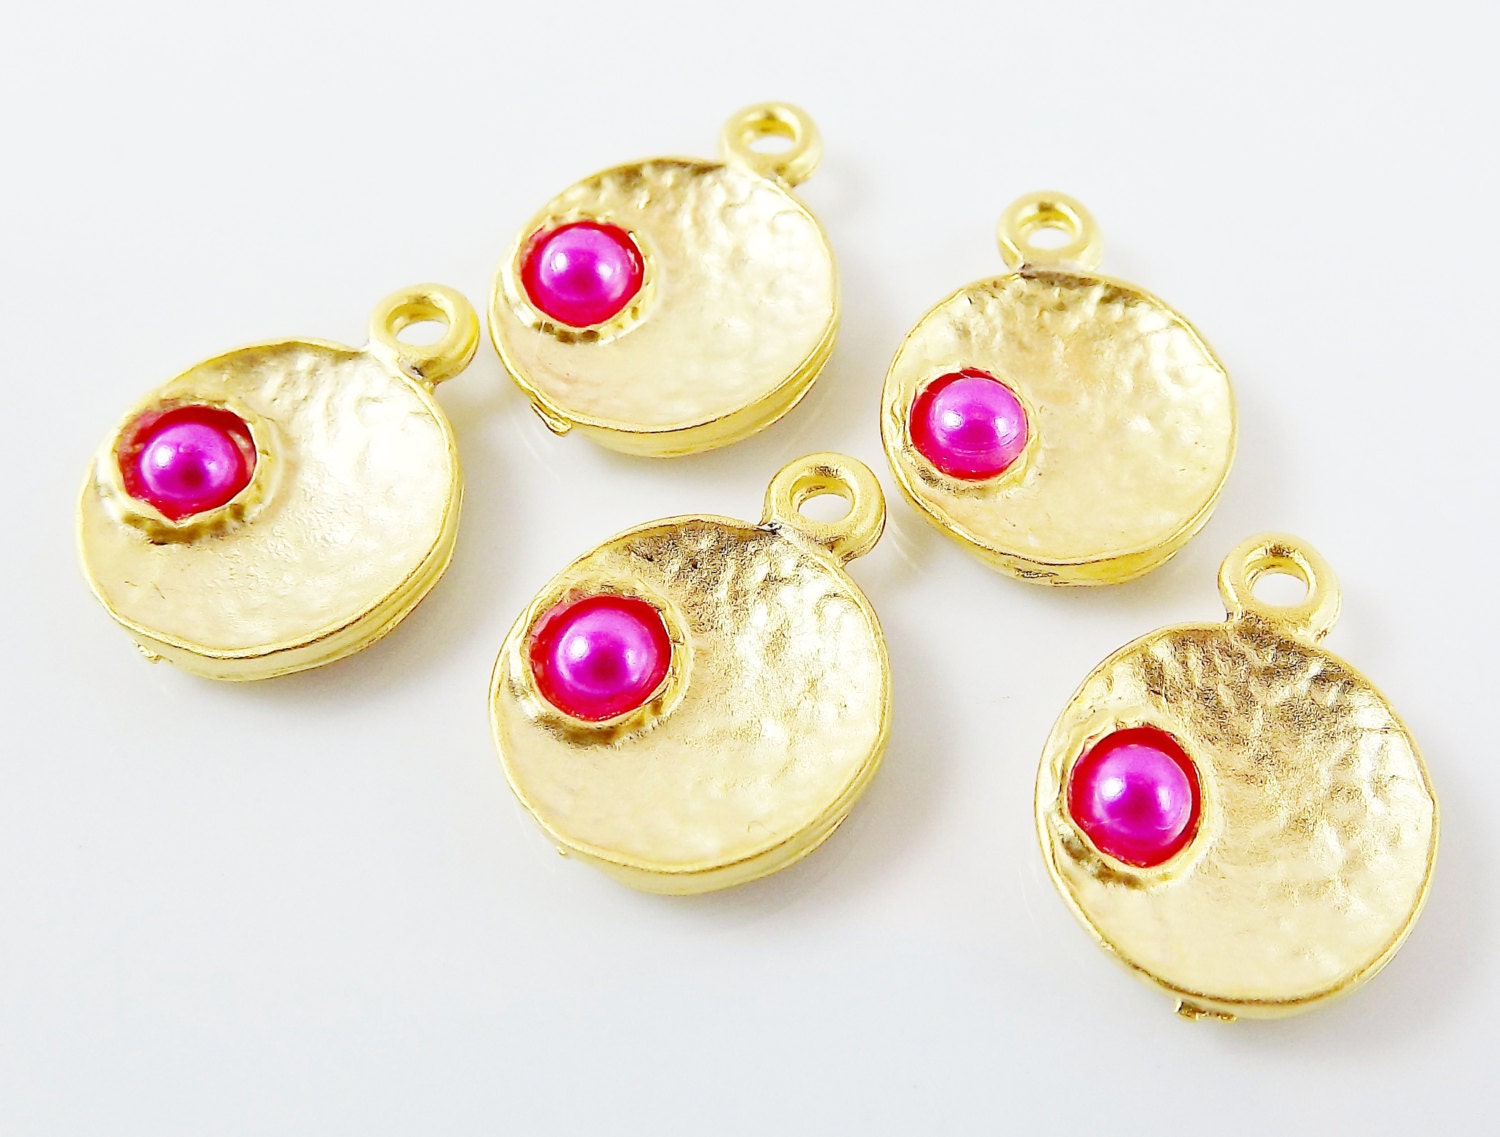 NEW - 5 Hot Pink Pearl Bead 22k Matte Gold Plated Inverted Dome Shaped Charms